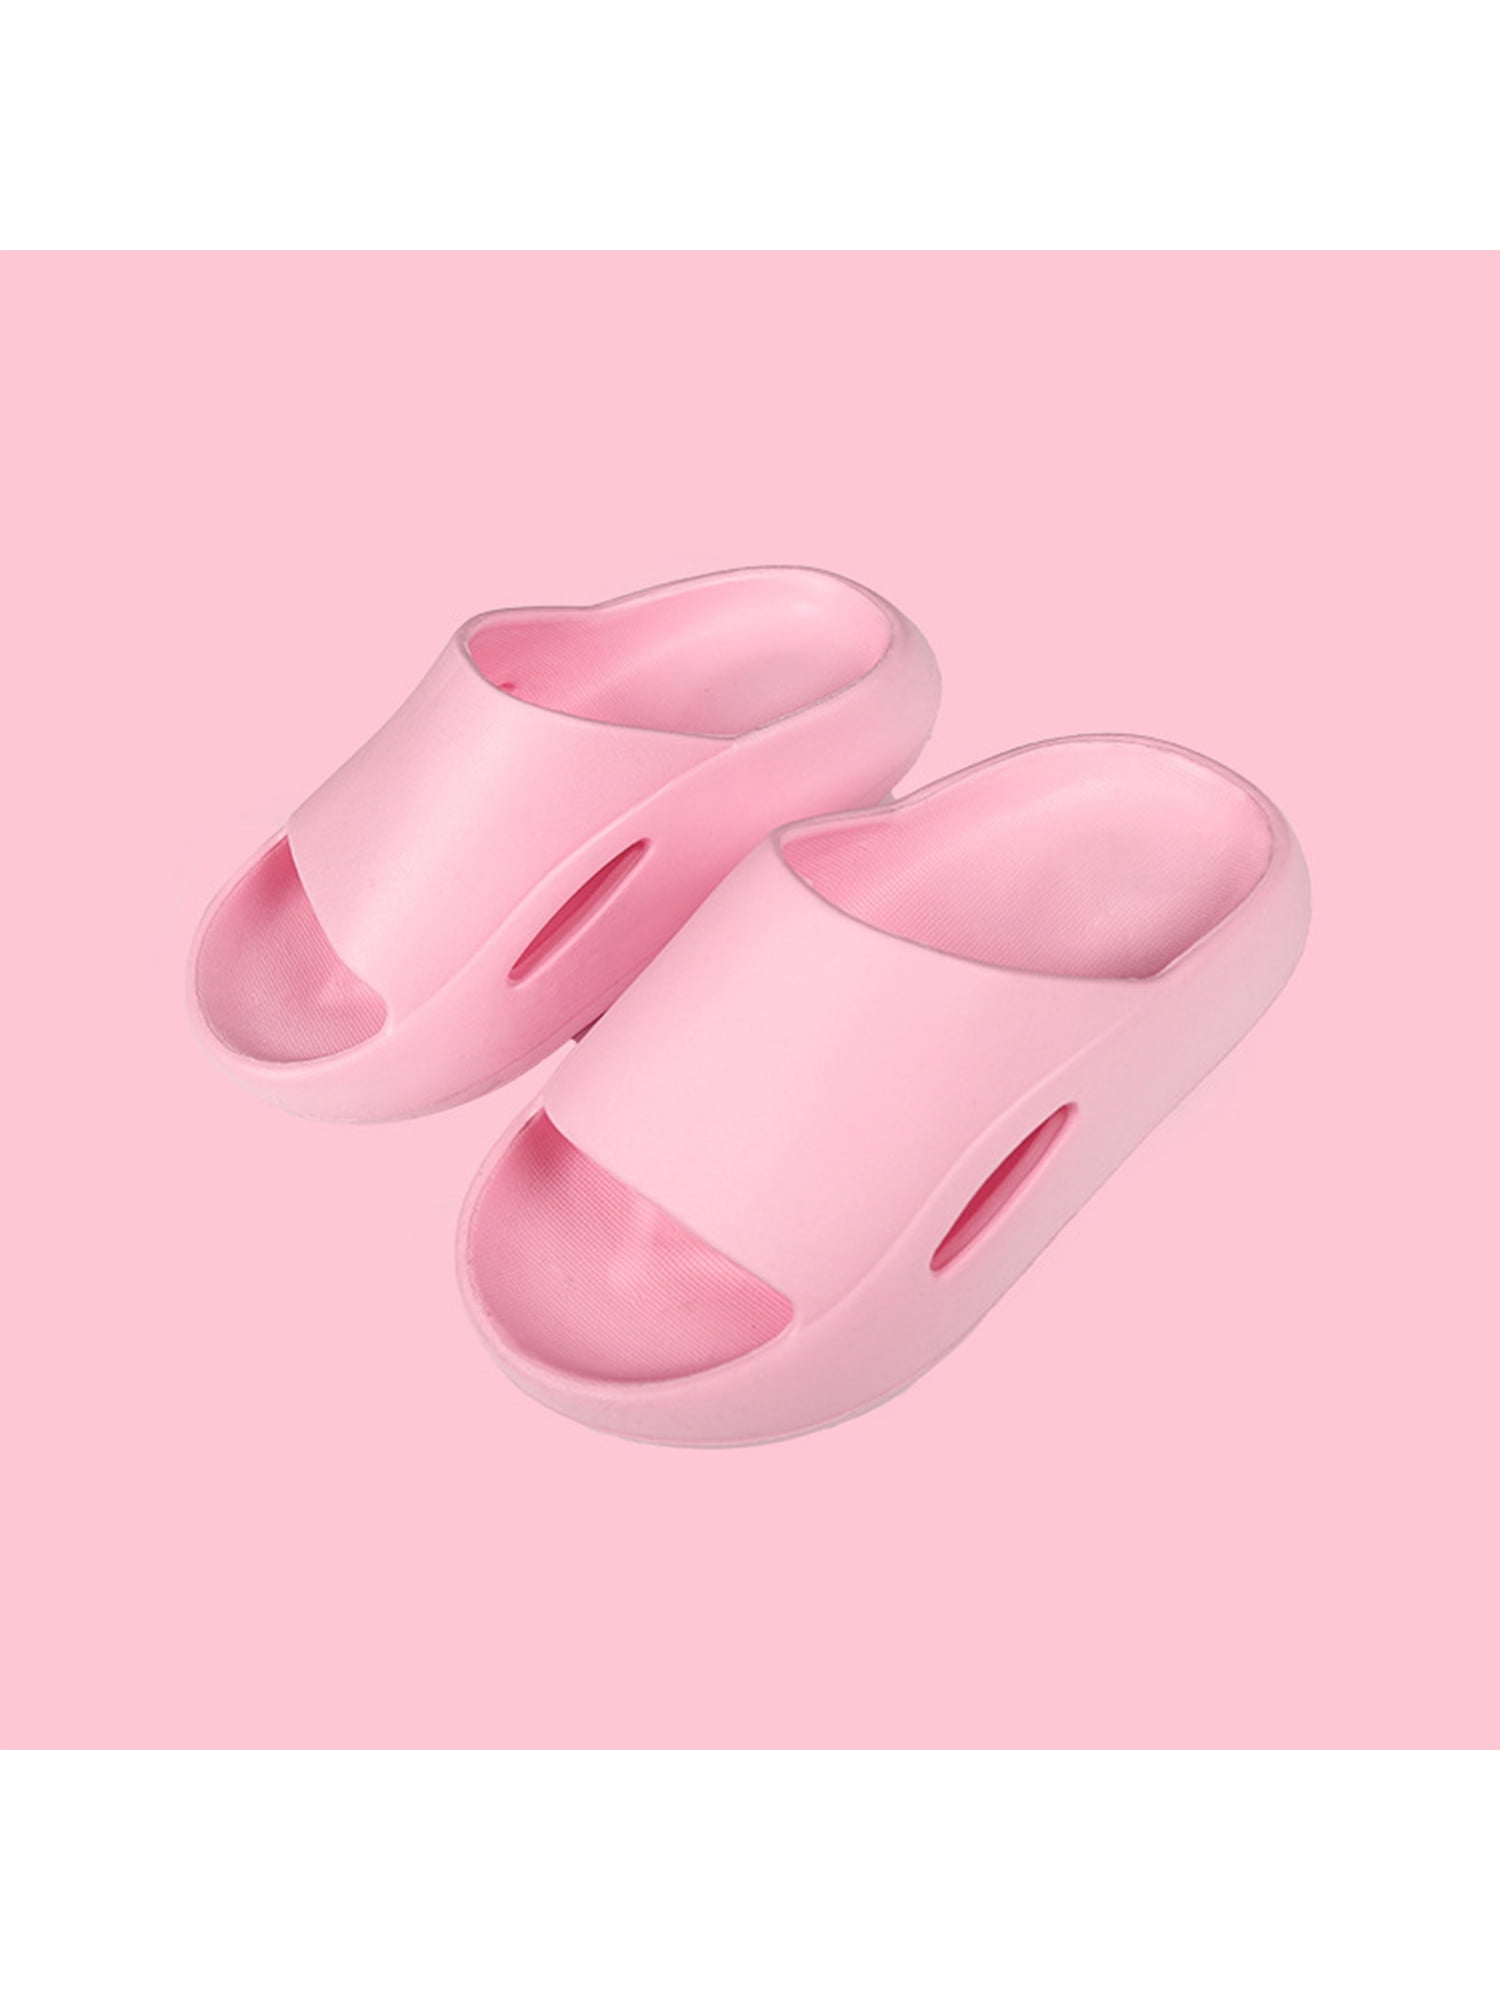 The Best Shower Shoes For Women And Men In 2022 | Shark Slippers Non-slip Shower  Bathroom Slippers Soft Summer Slide Sandals For Girls And Boys New 11  Colors To Choose From |